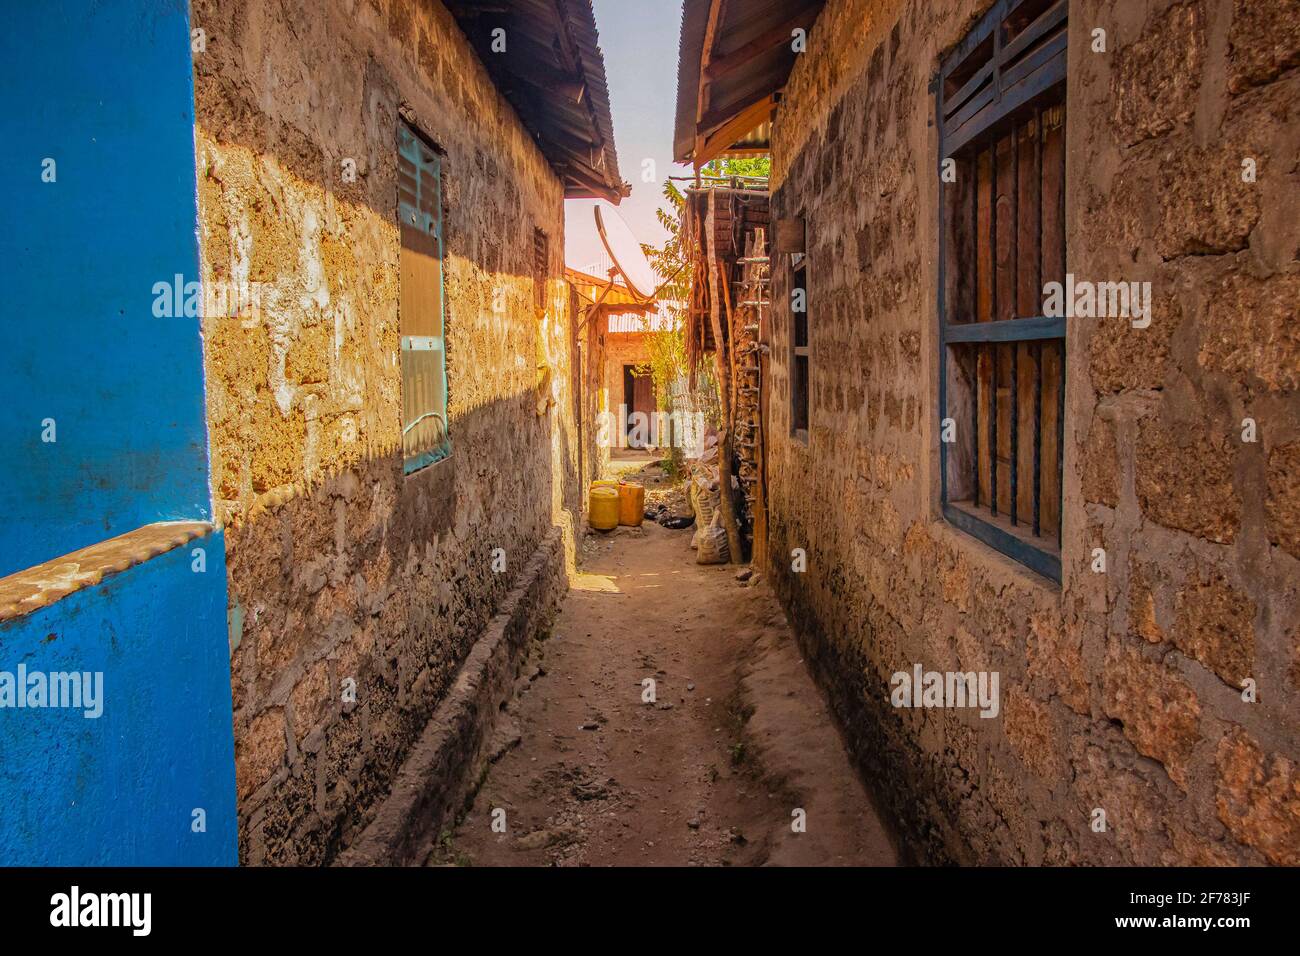 Narrow alley between typical stone houses in an African village on Wasini island. It is a small hamlet in Kenya. Stock Photo